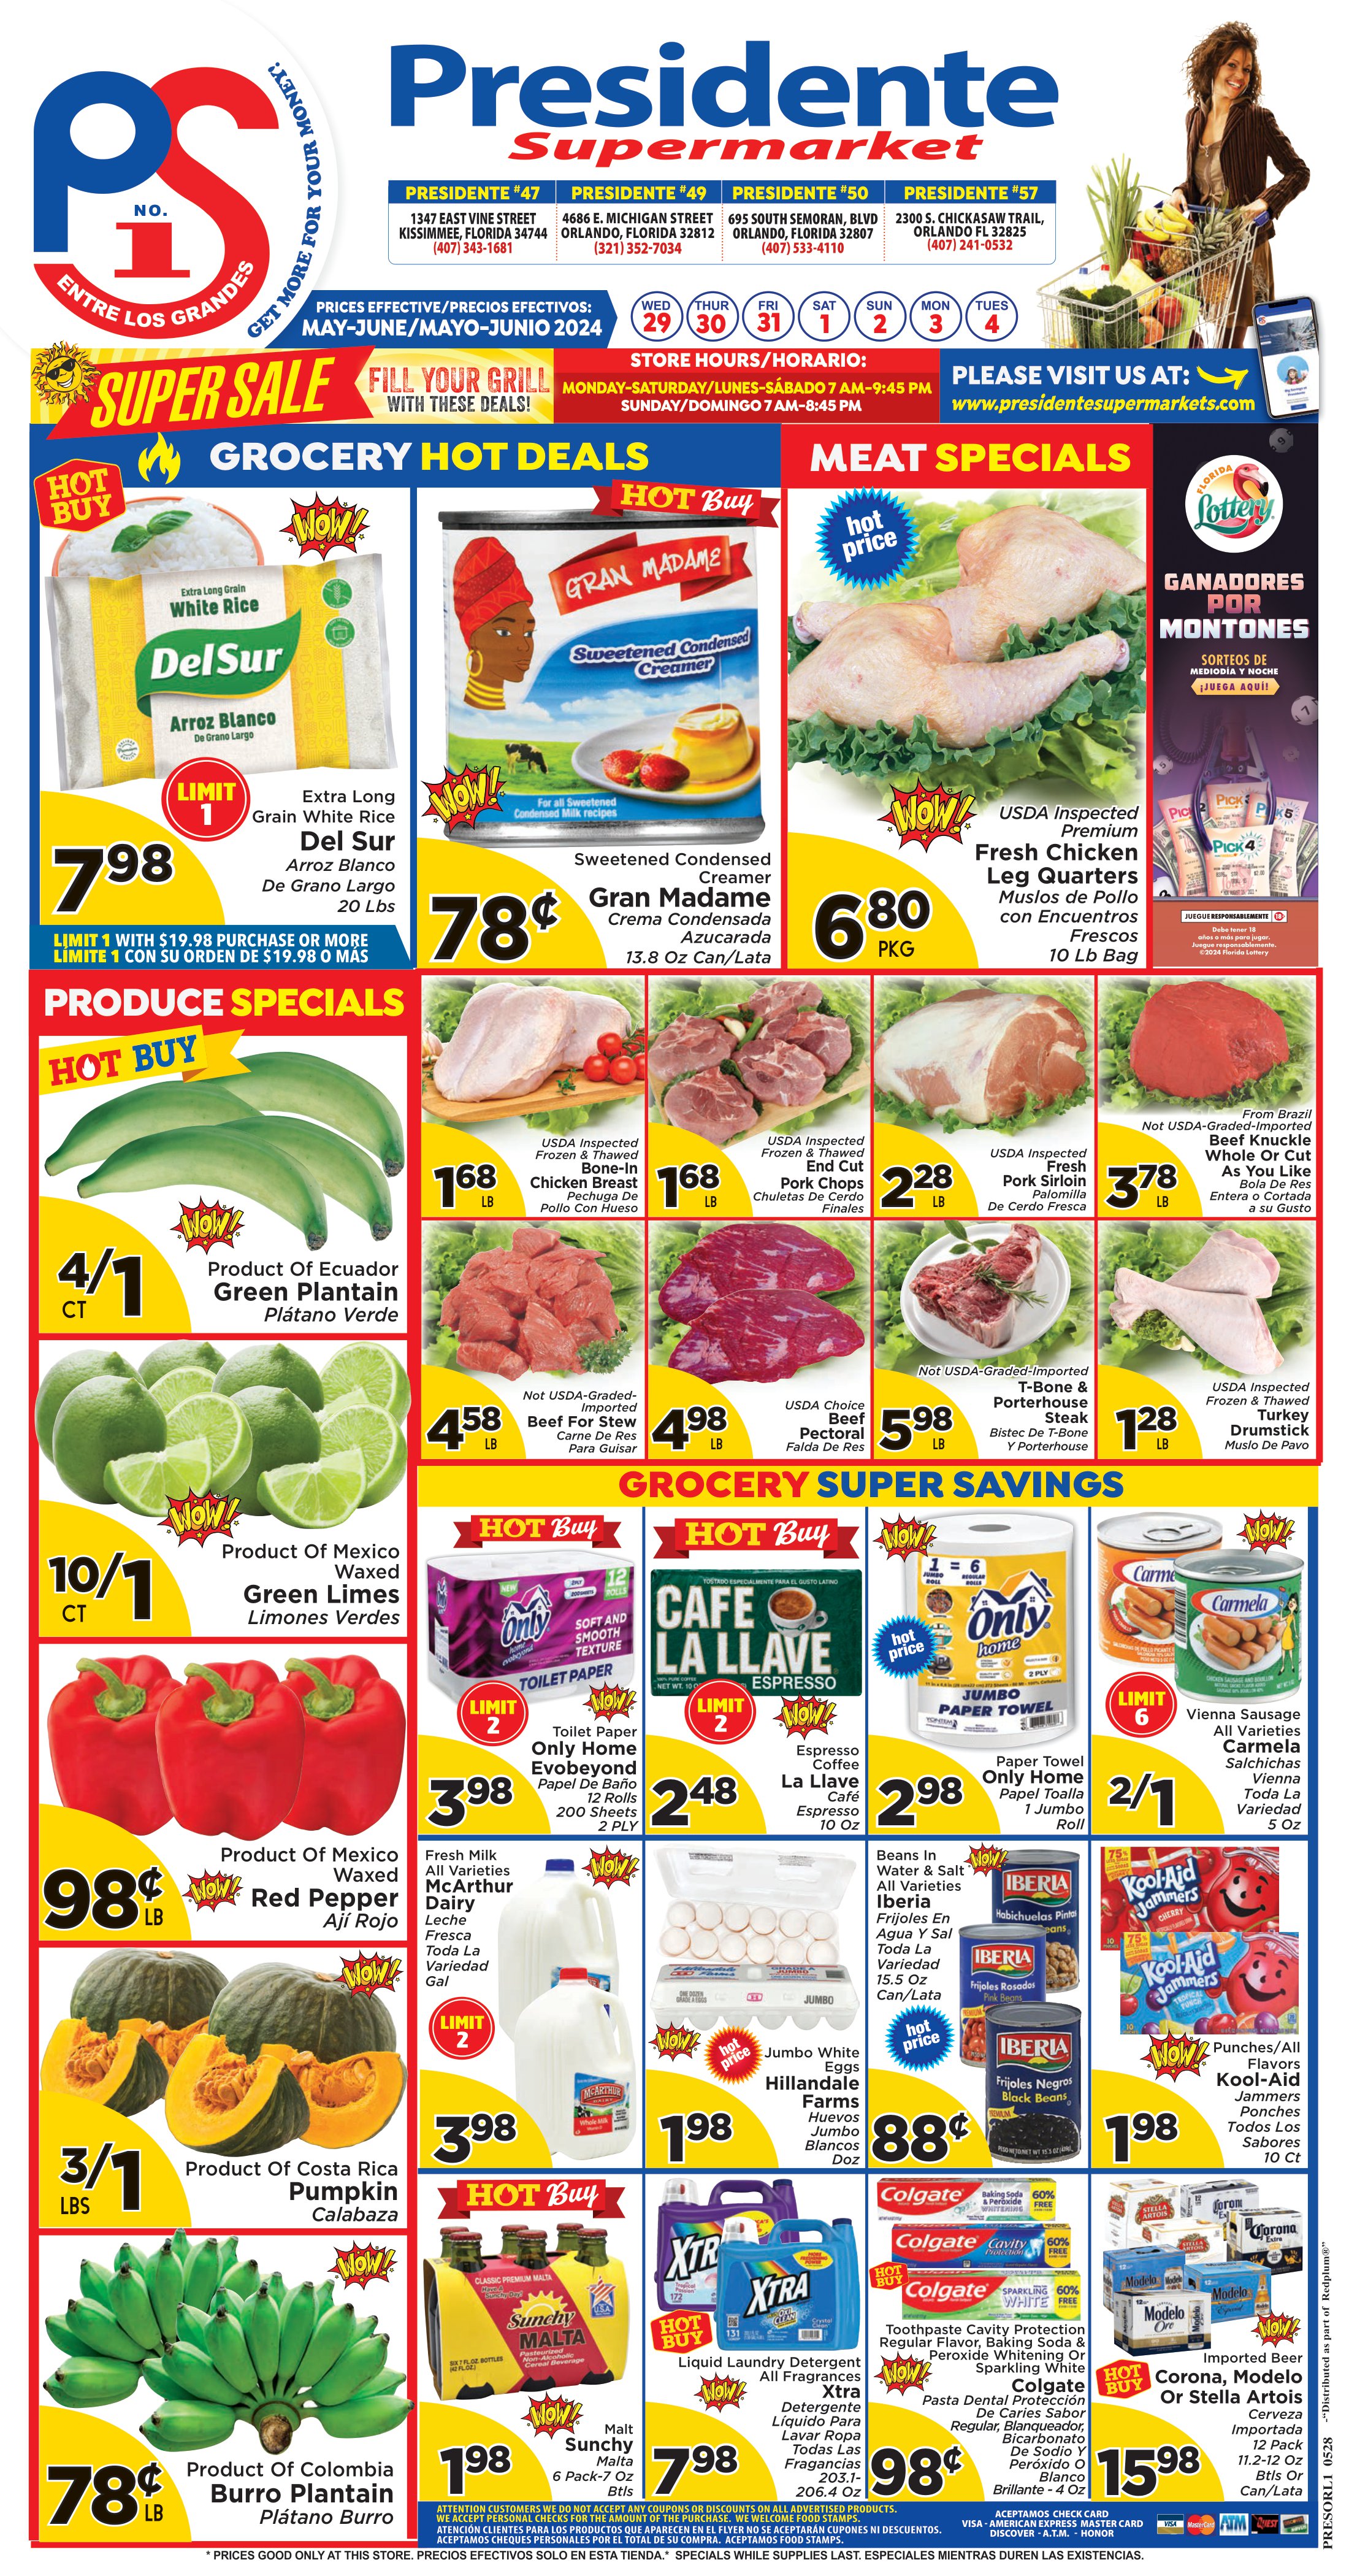 Presidente Supermarket - Weekly Promo for Store 47, 49, 50 and 57 - Page 1